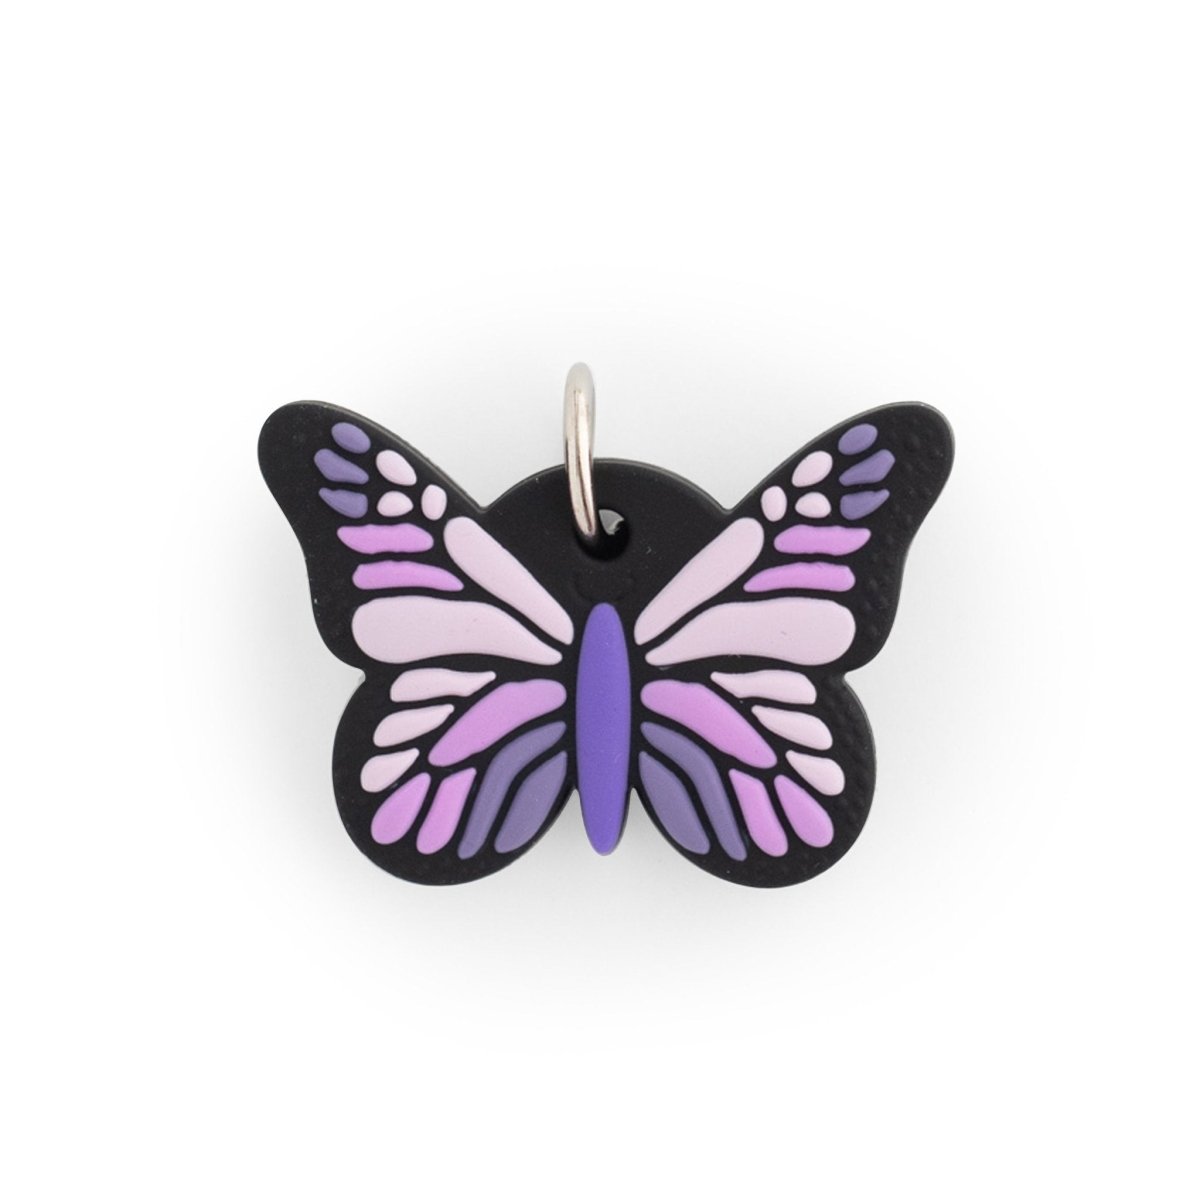 Silicone Charms Butterflies Black from Cara & Co Craft Supply